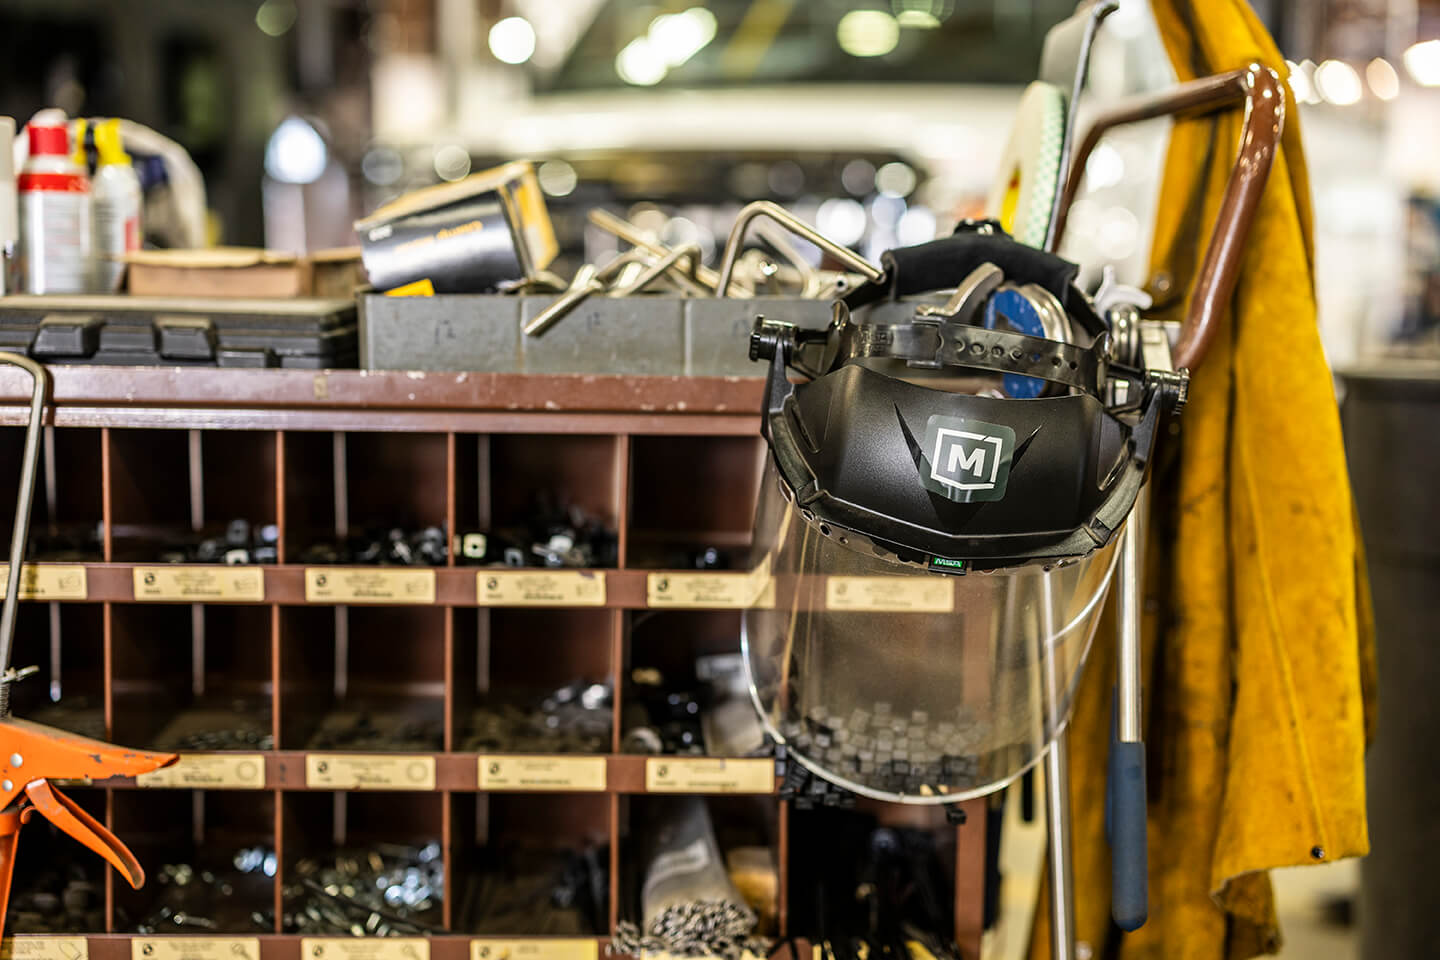 Welding helmets and tools on a shelf in a workshop.